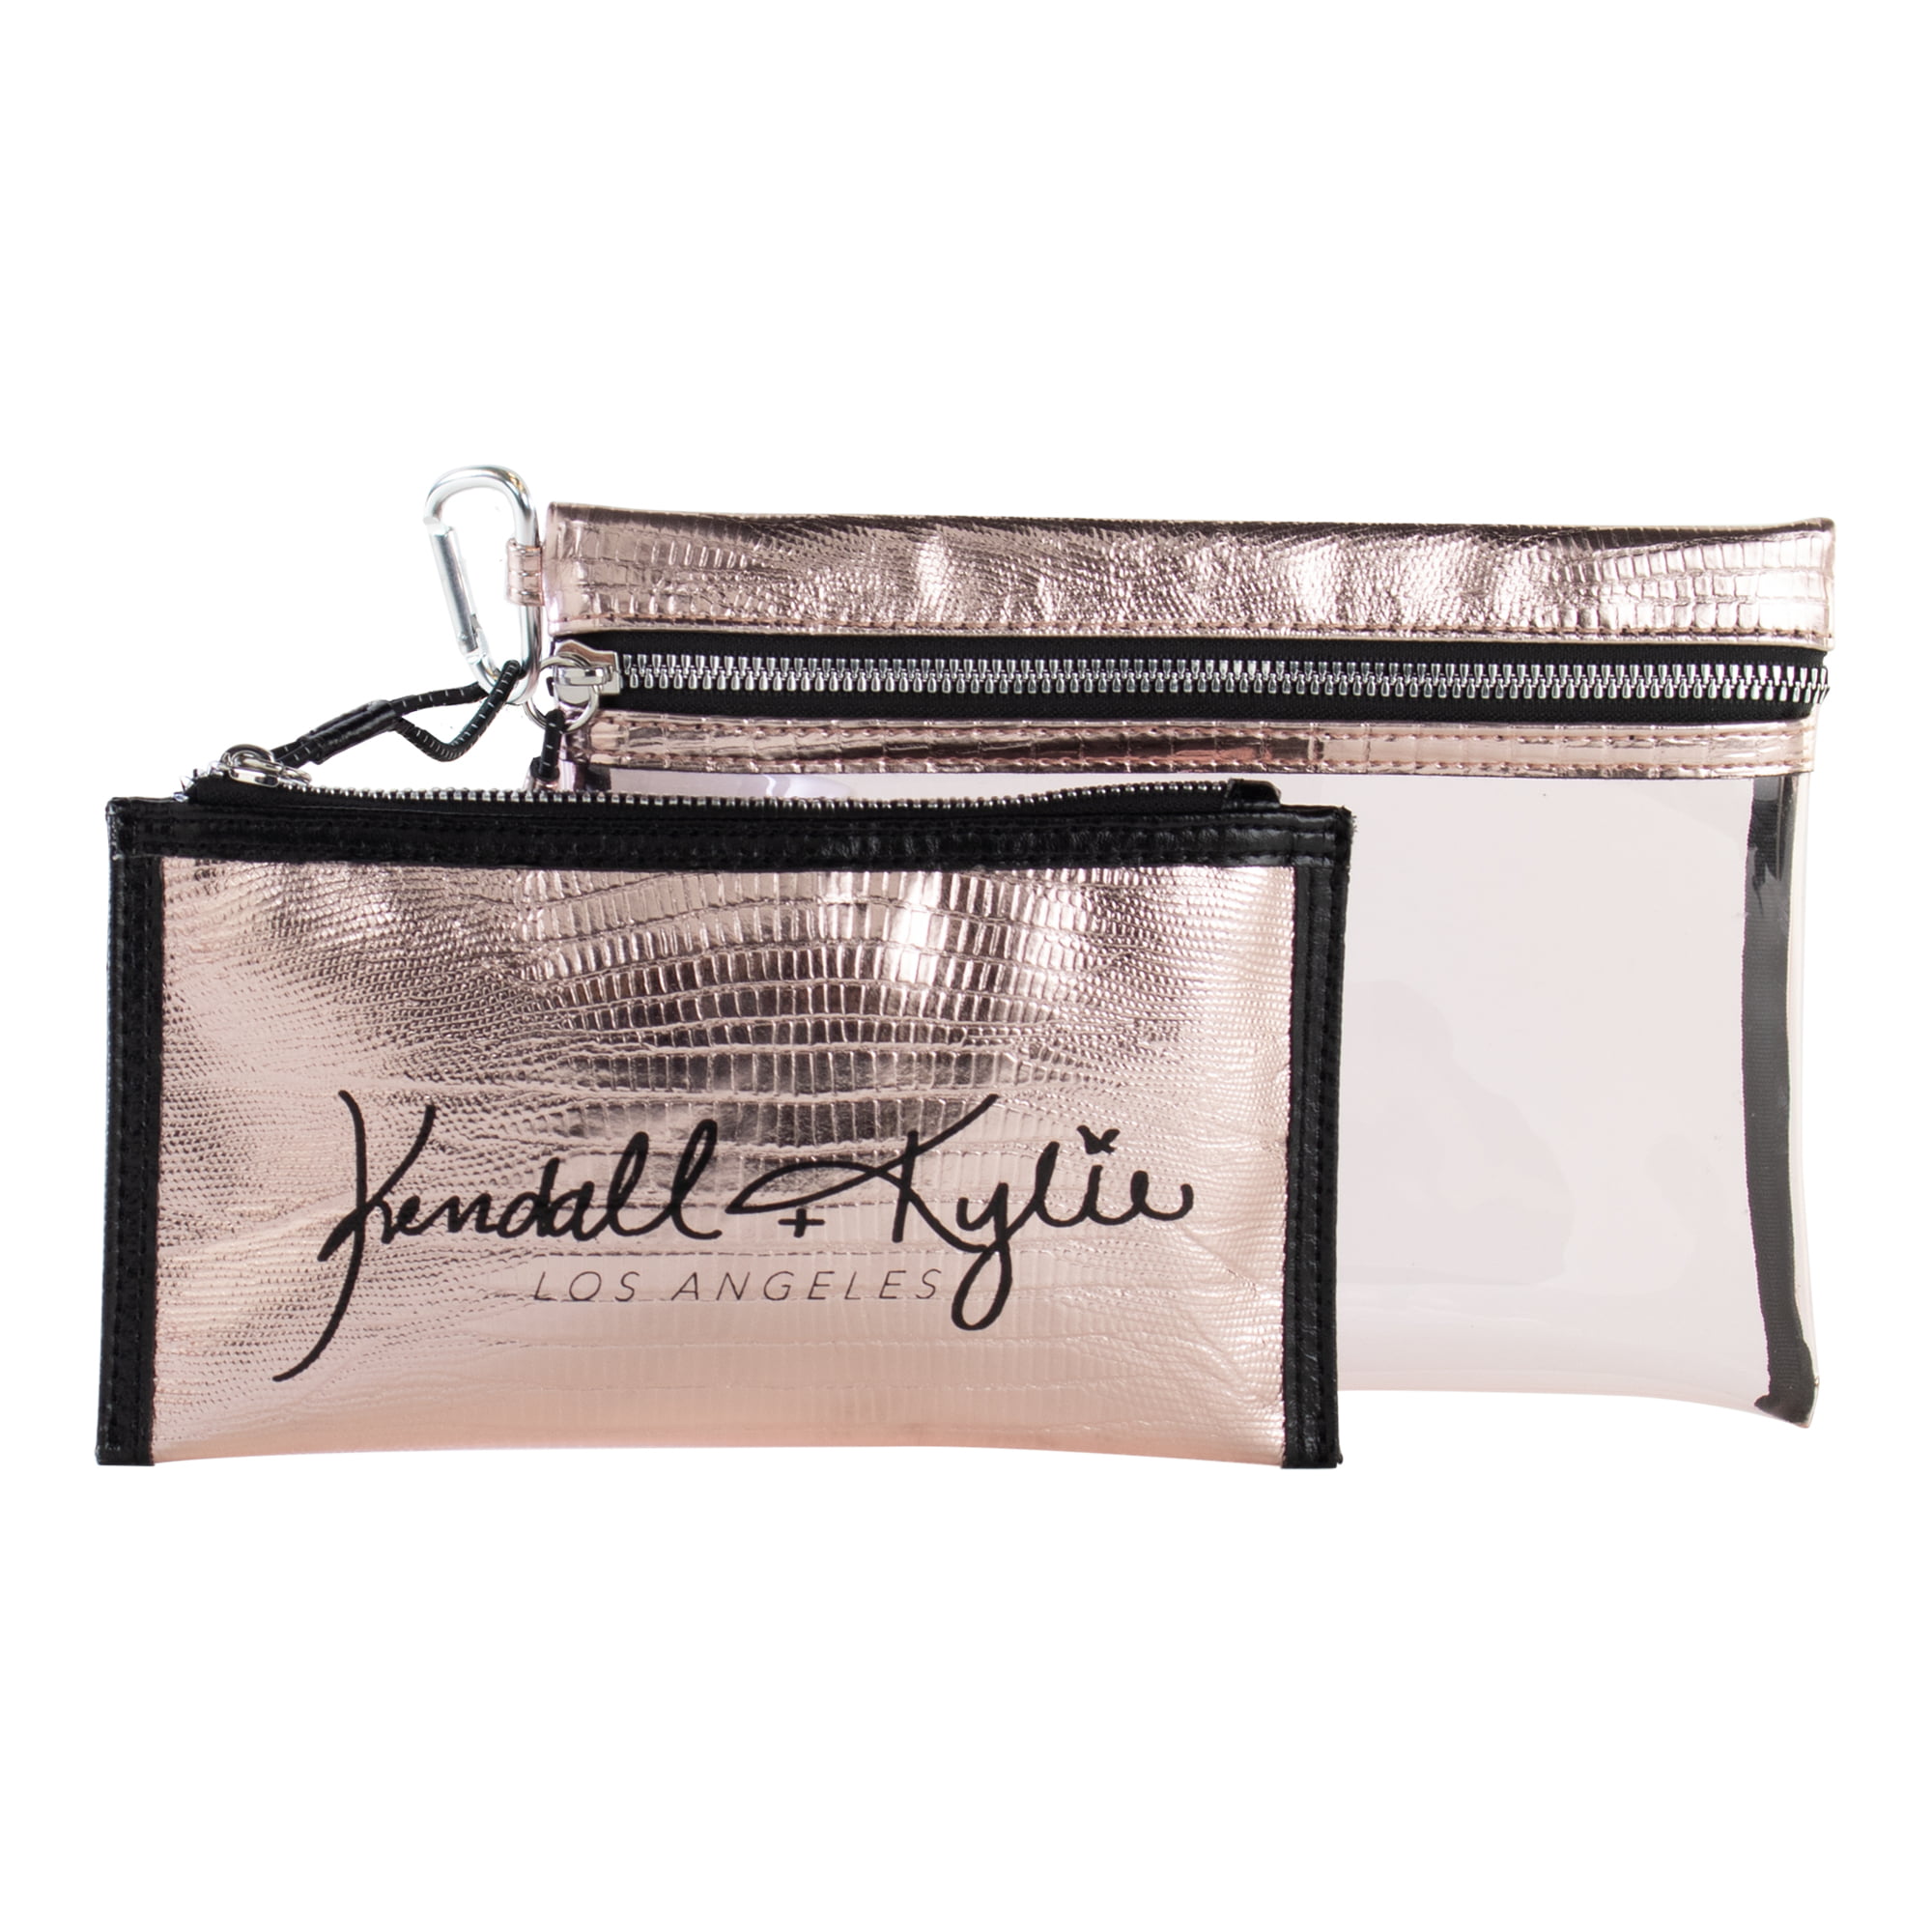 Kendall + Kylie Removable Double Zip Pouch - Walmart.com